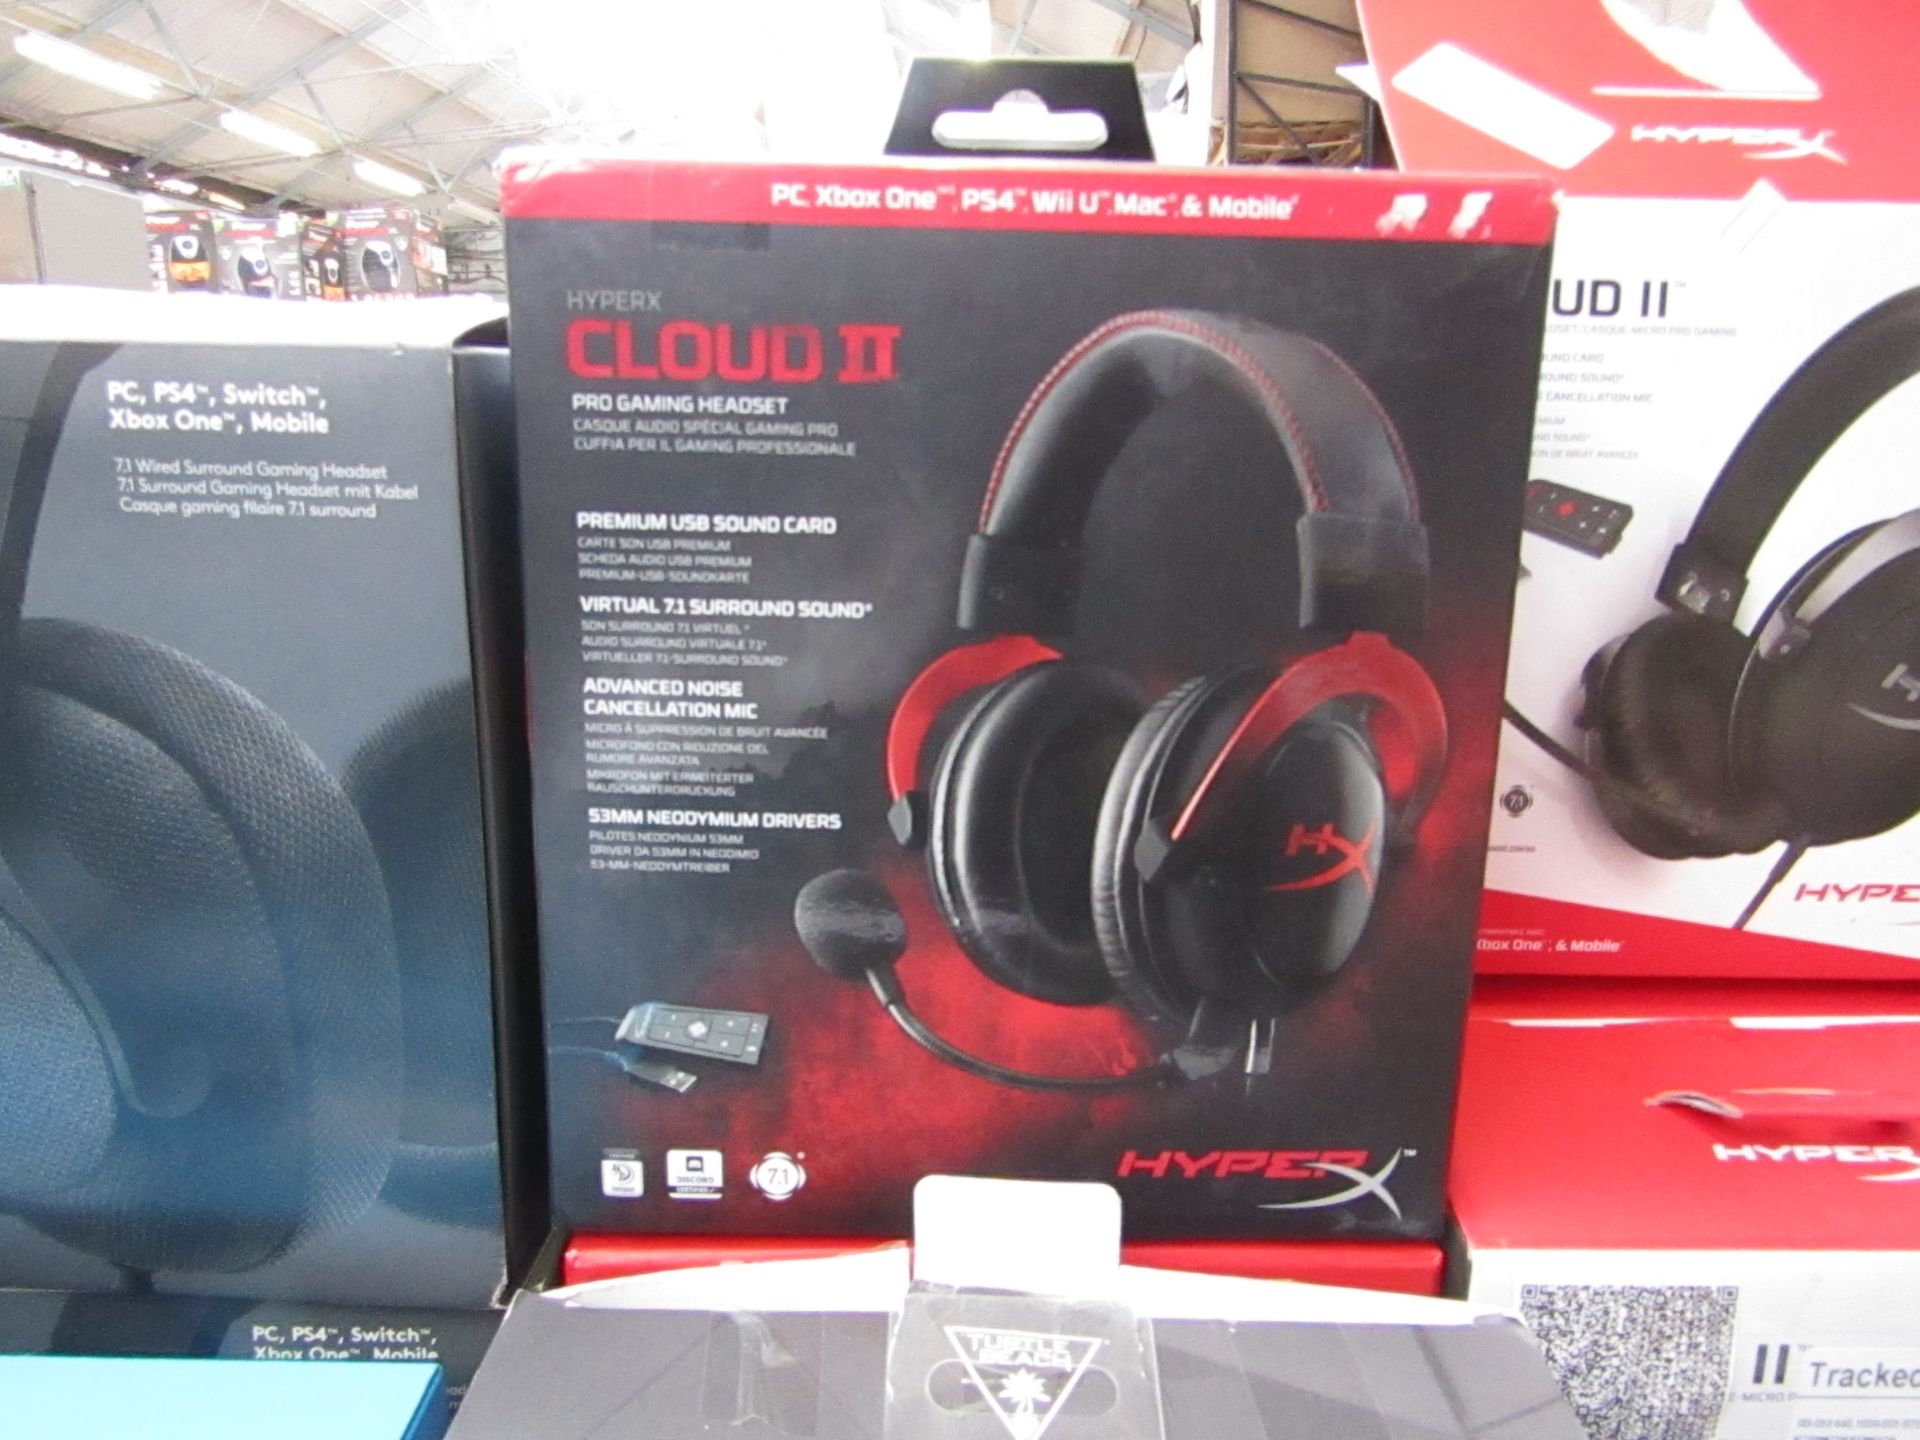 Hyper X Cloud 2 gaming headphones, untested and boxed.